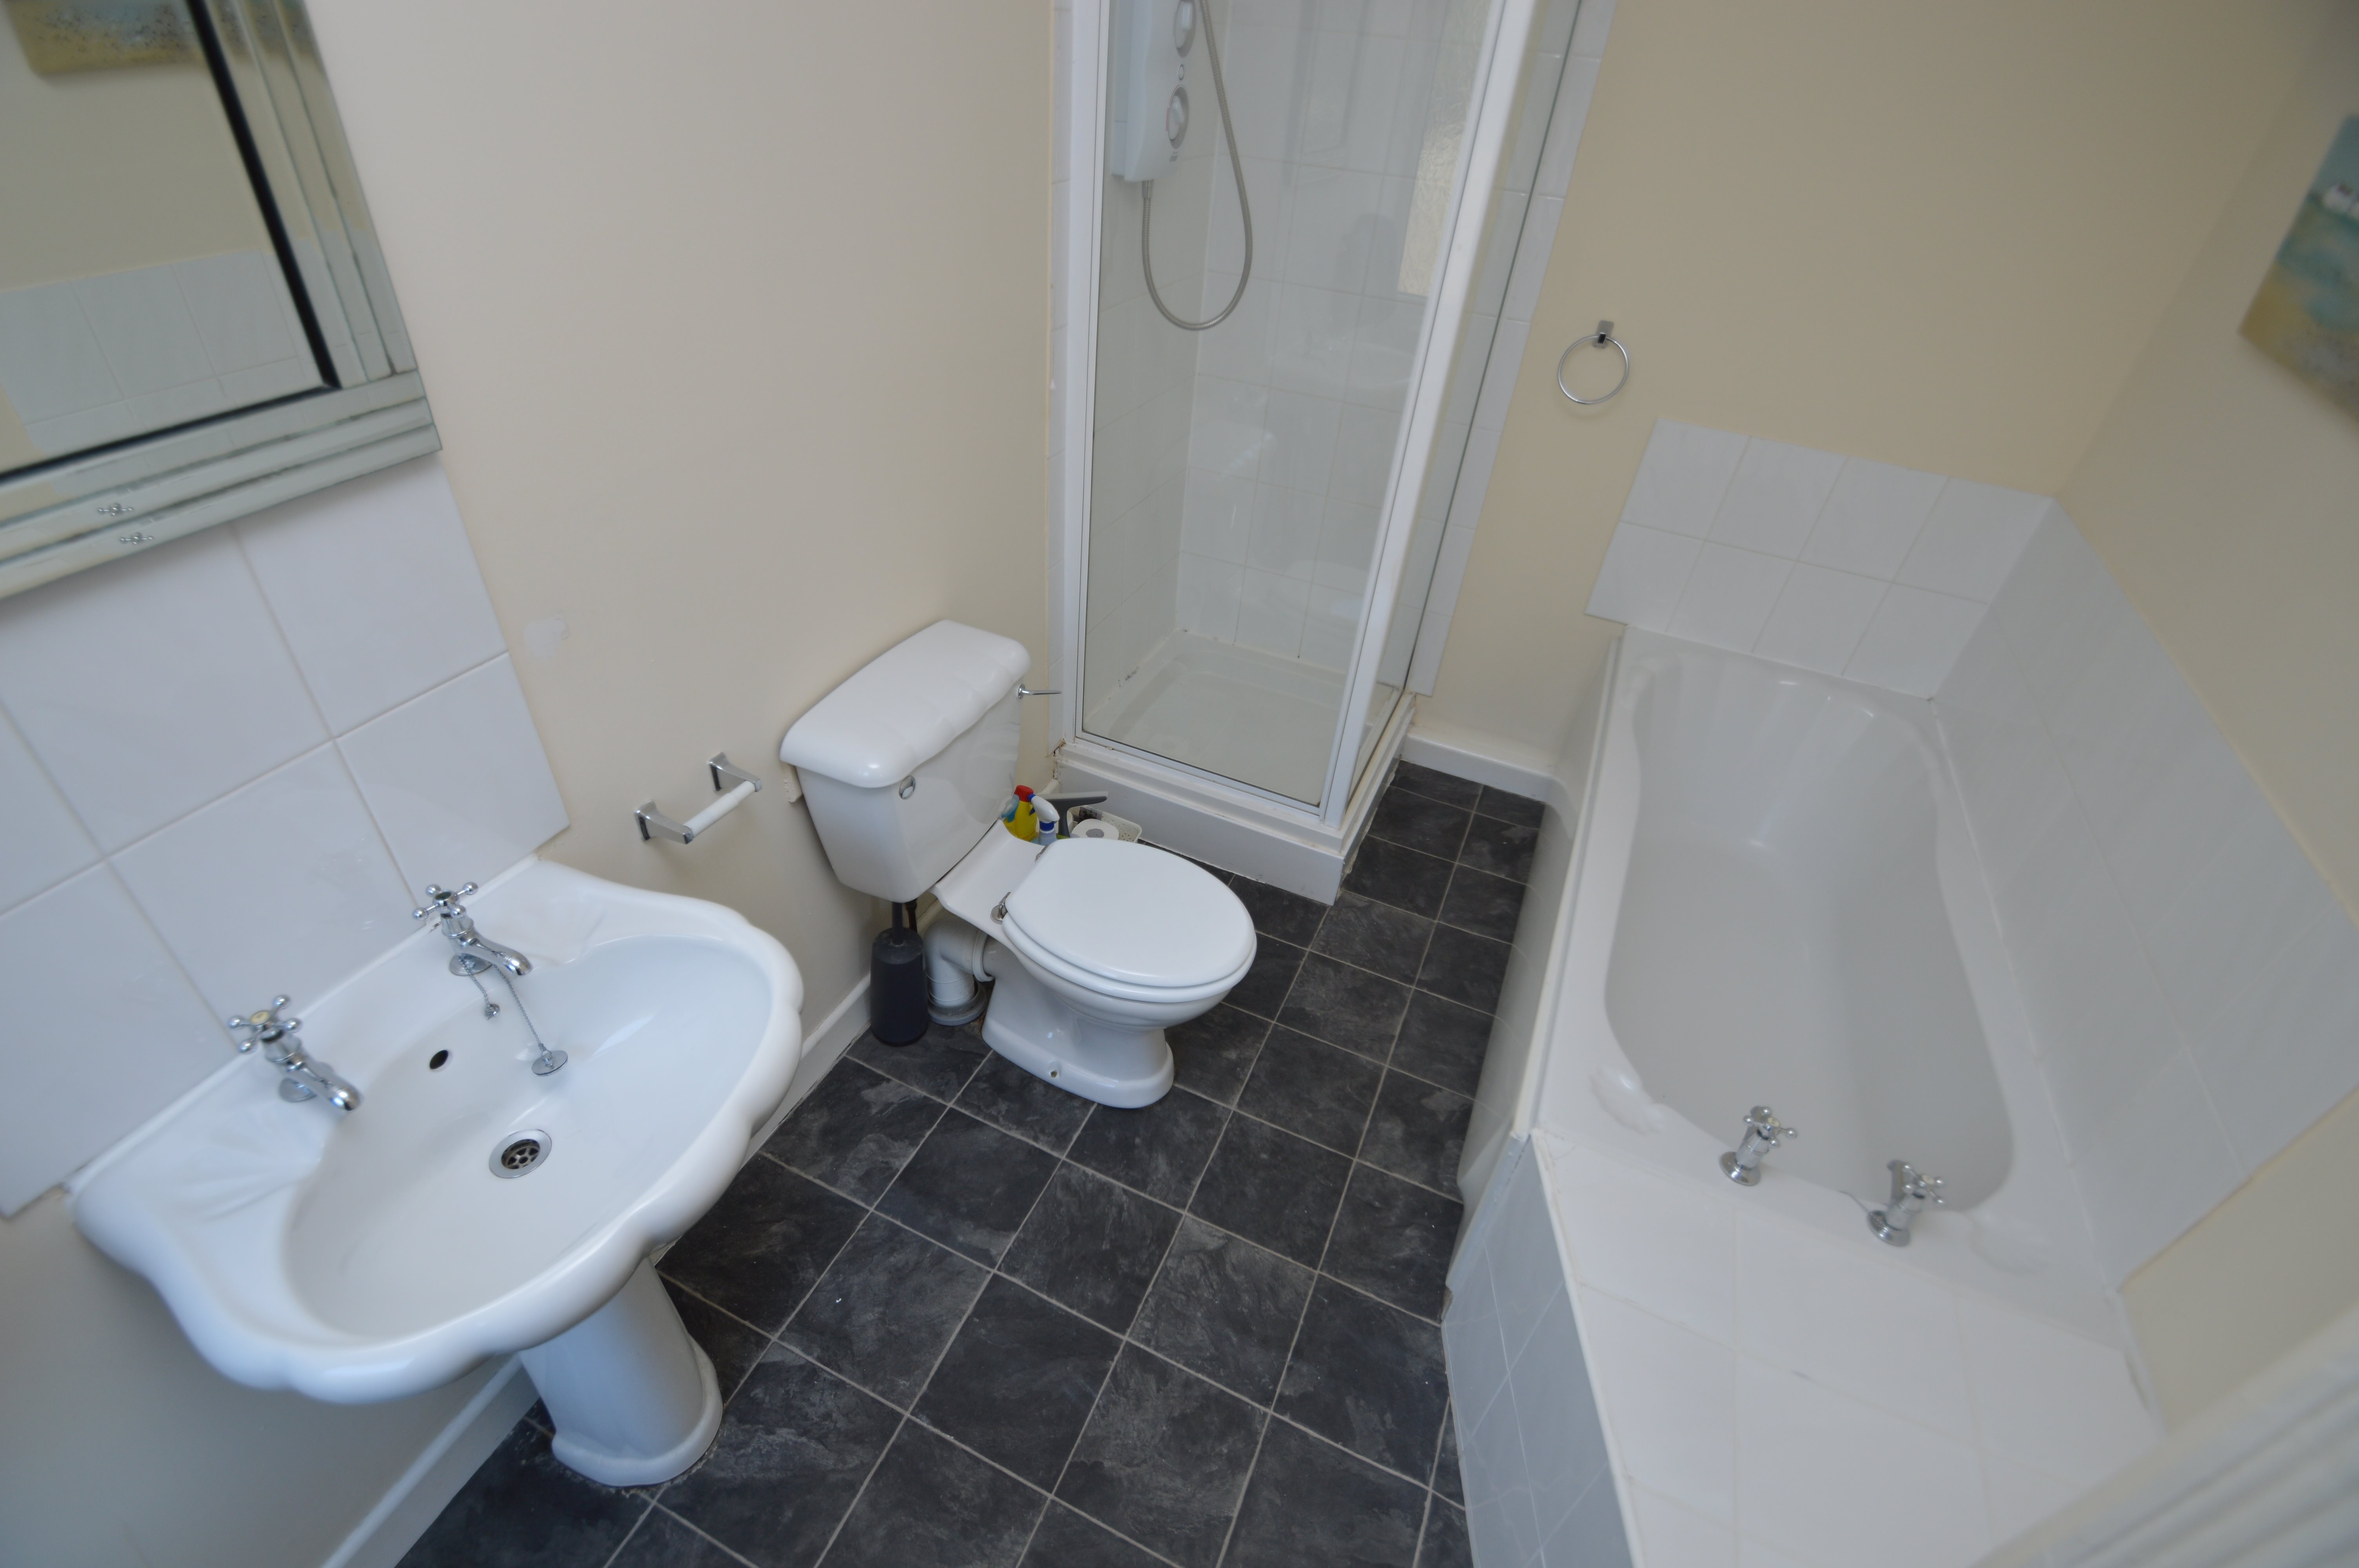 1 bed house / flat share to rent in Wood Road, Treforest 8